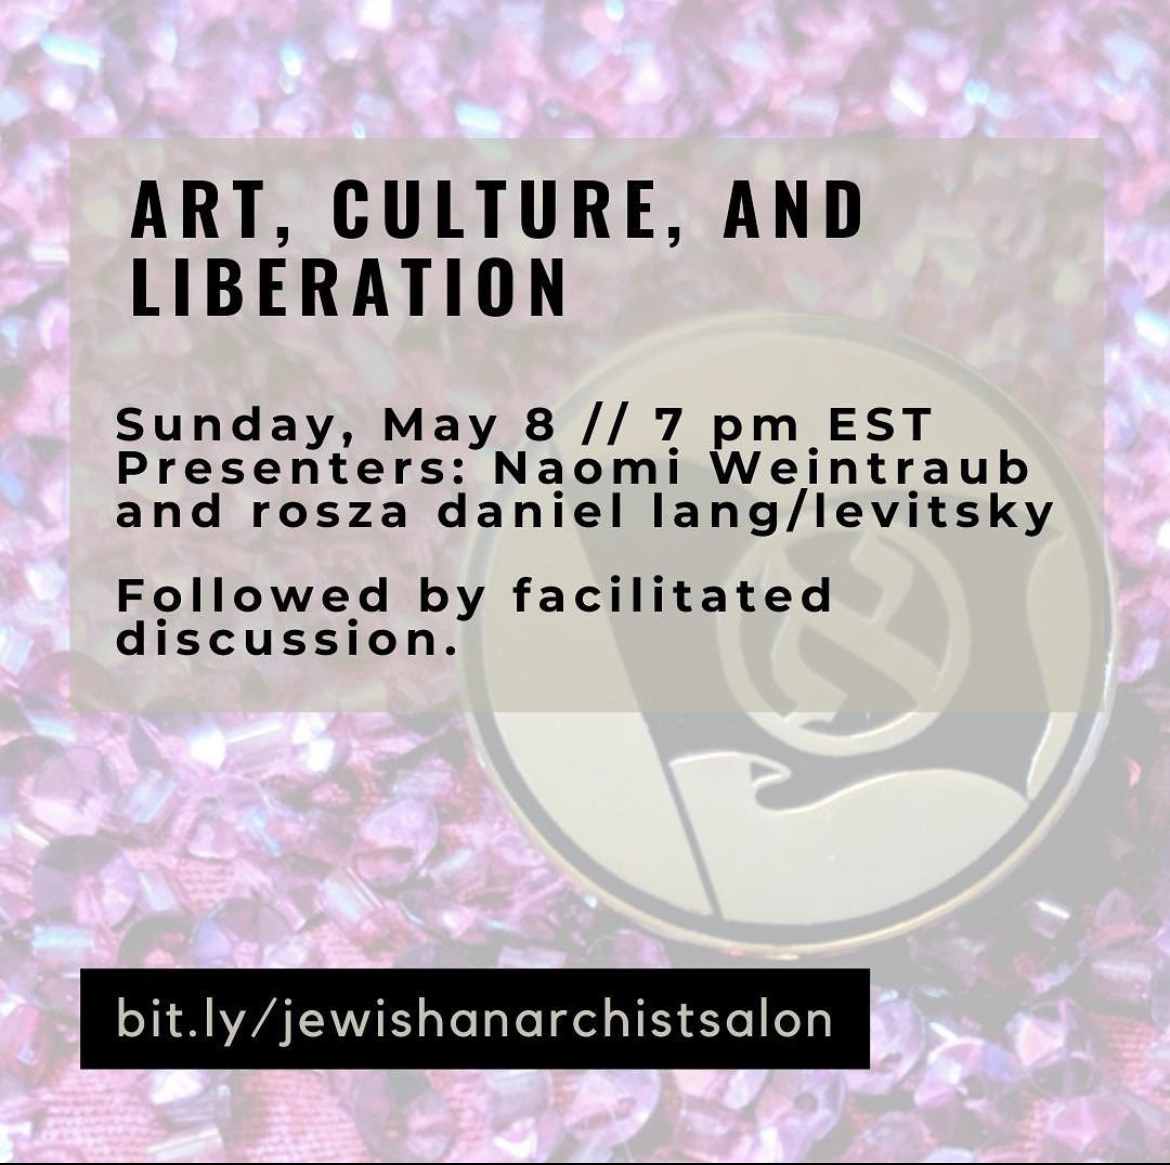 ID: Text reads, “Art, Culture, and Liberation Sunday, May 8 // 7pm EST Presenters: Naomi Weintraub and rosza daniel lang/levitsky Followed by a facilitated discussion.” Link reads “bit.ly/jewishanarchistsalon”